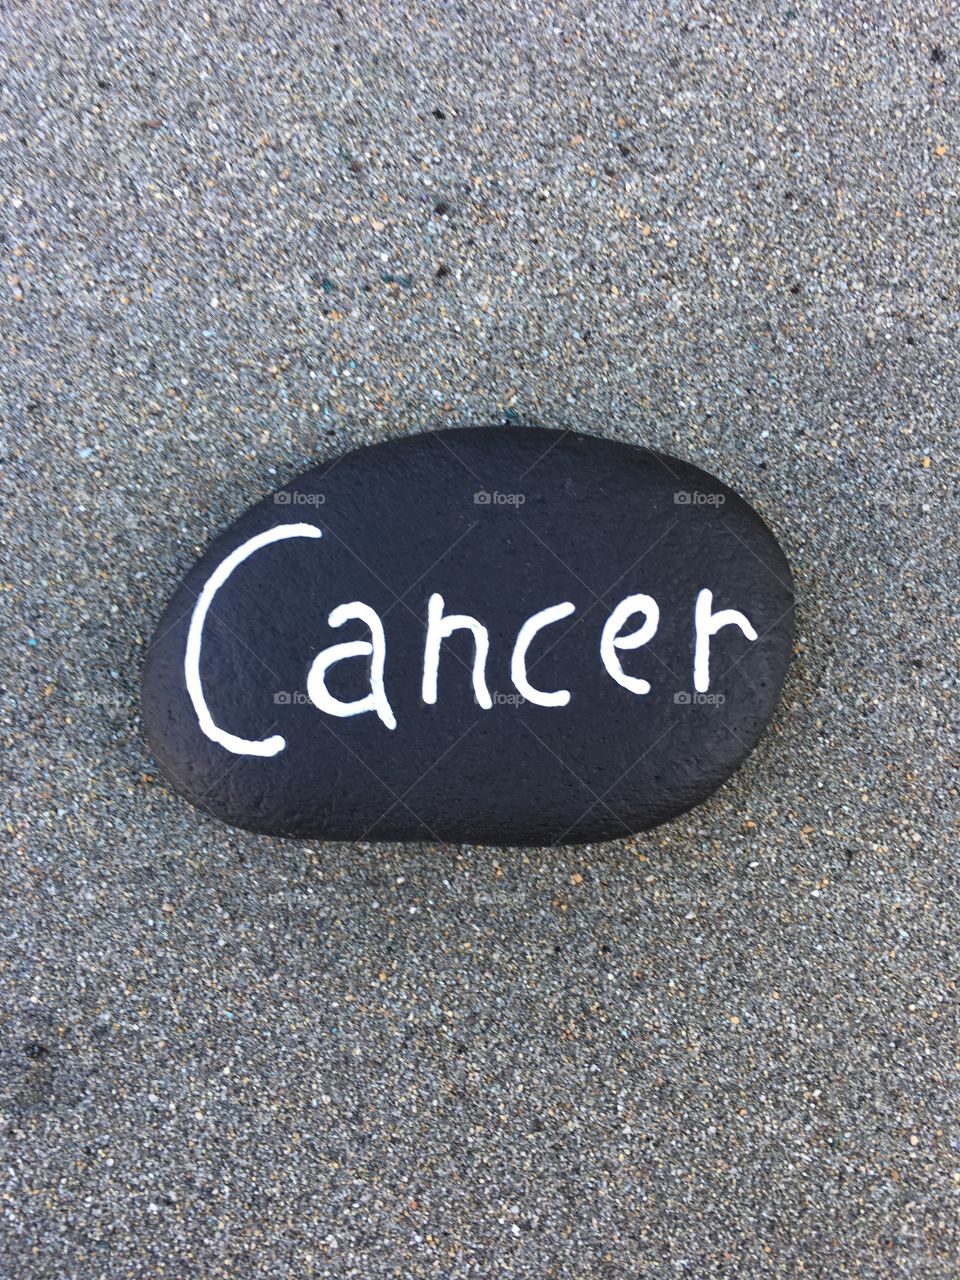 Cancer word carved on a stone over volcano sand 